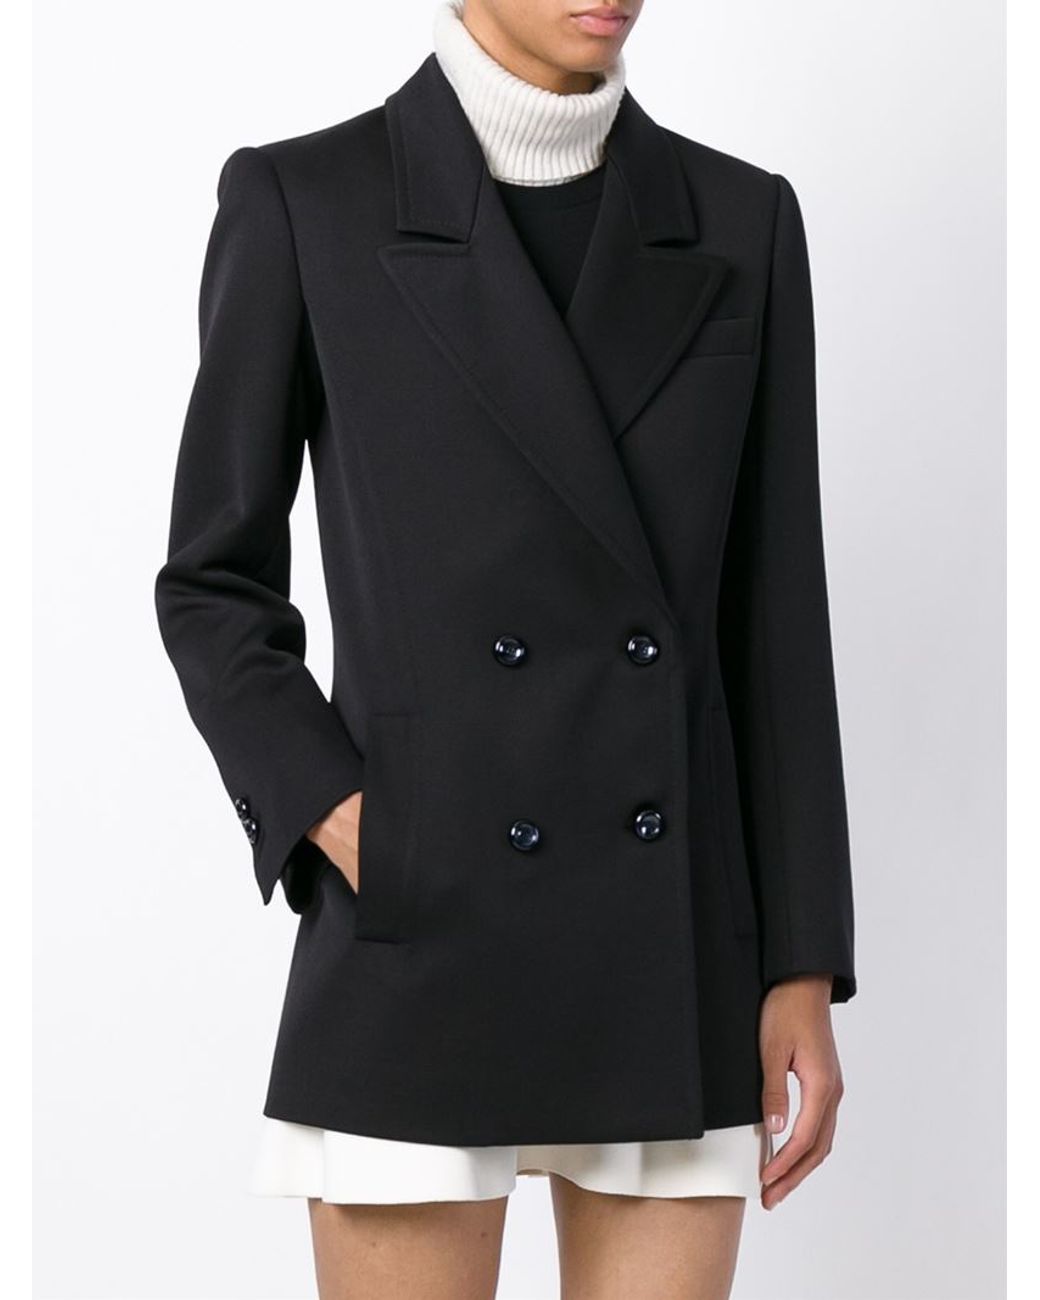 Viktor & Rolf Classic Double Breasted Blazer in Black | Lyst